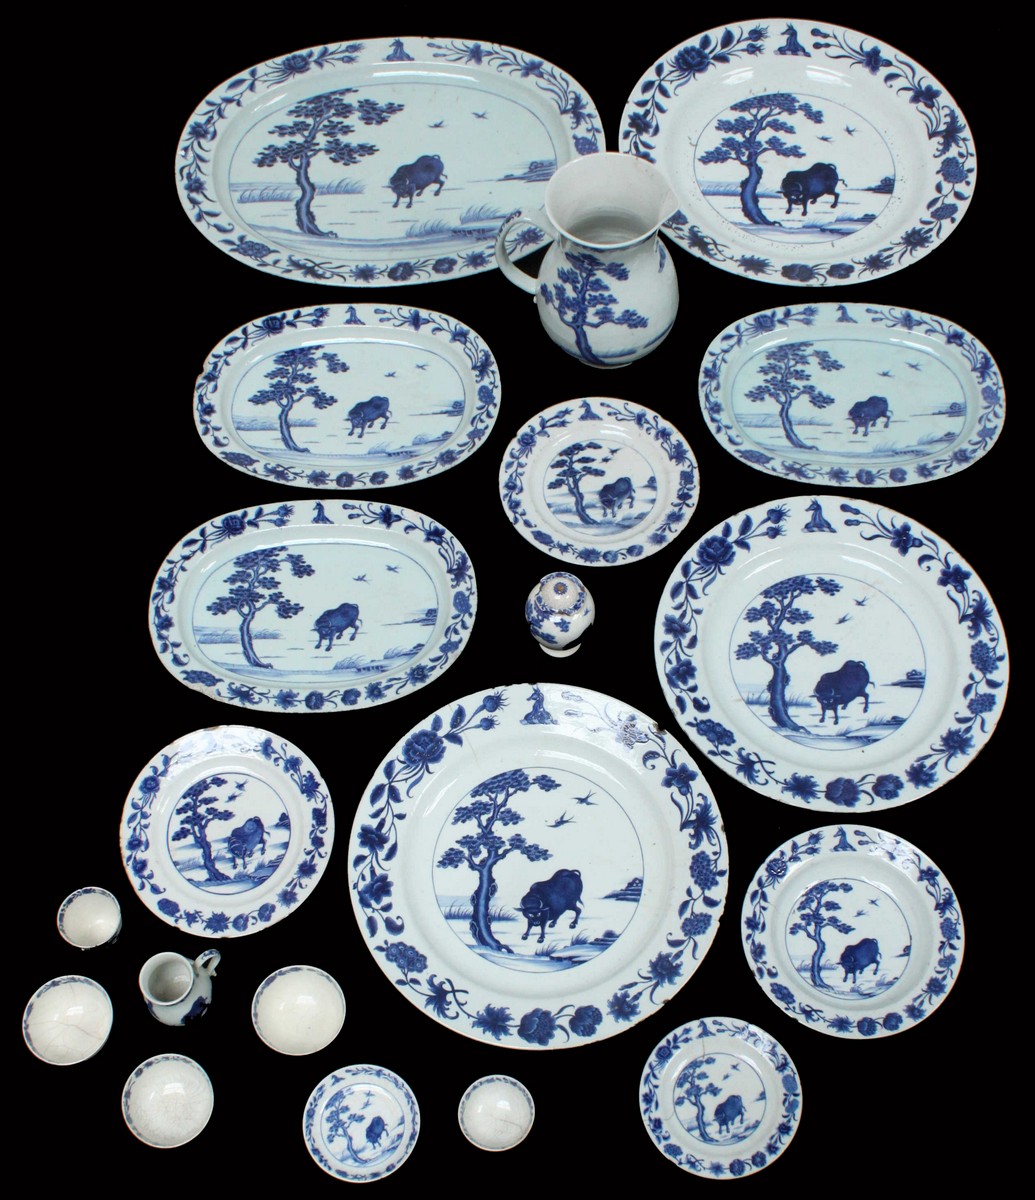 "A Rare Early 18th Century Chinese Armorial Porcelain part dinner service of twenty pieces, each